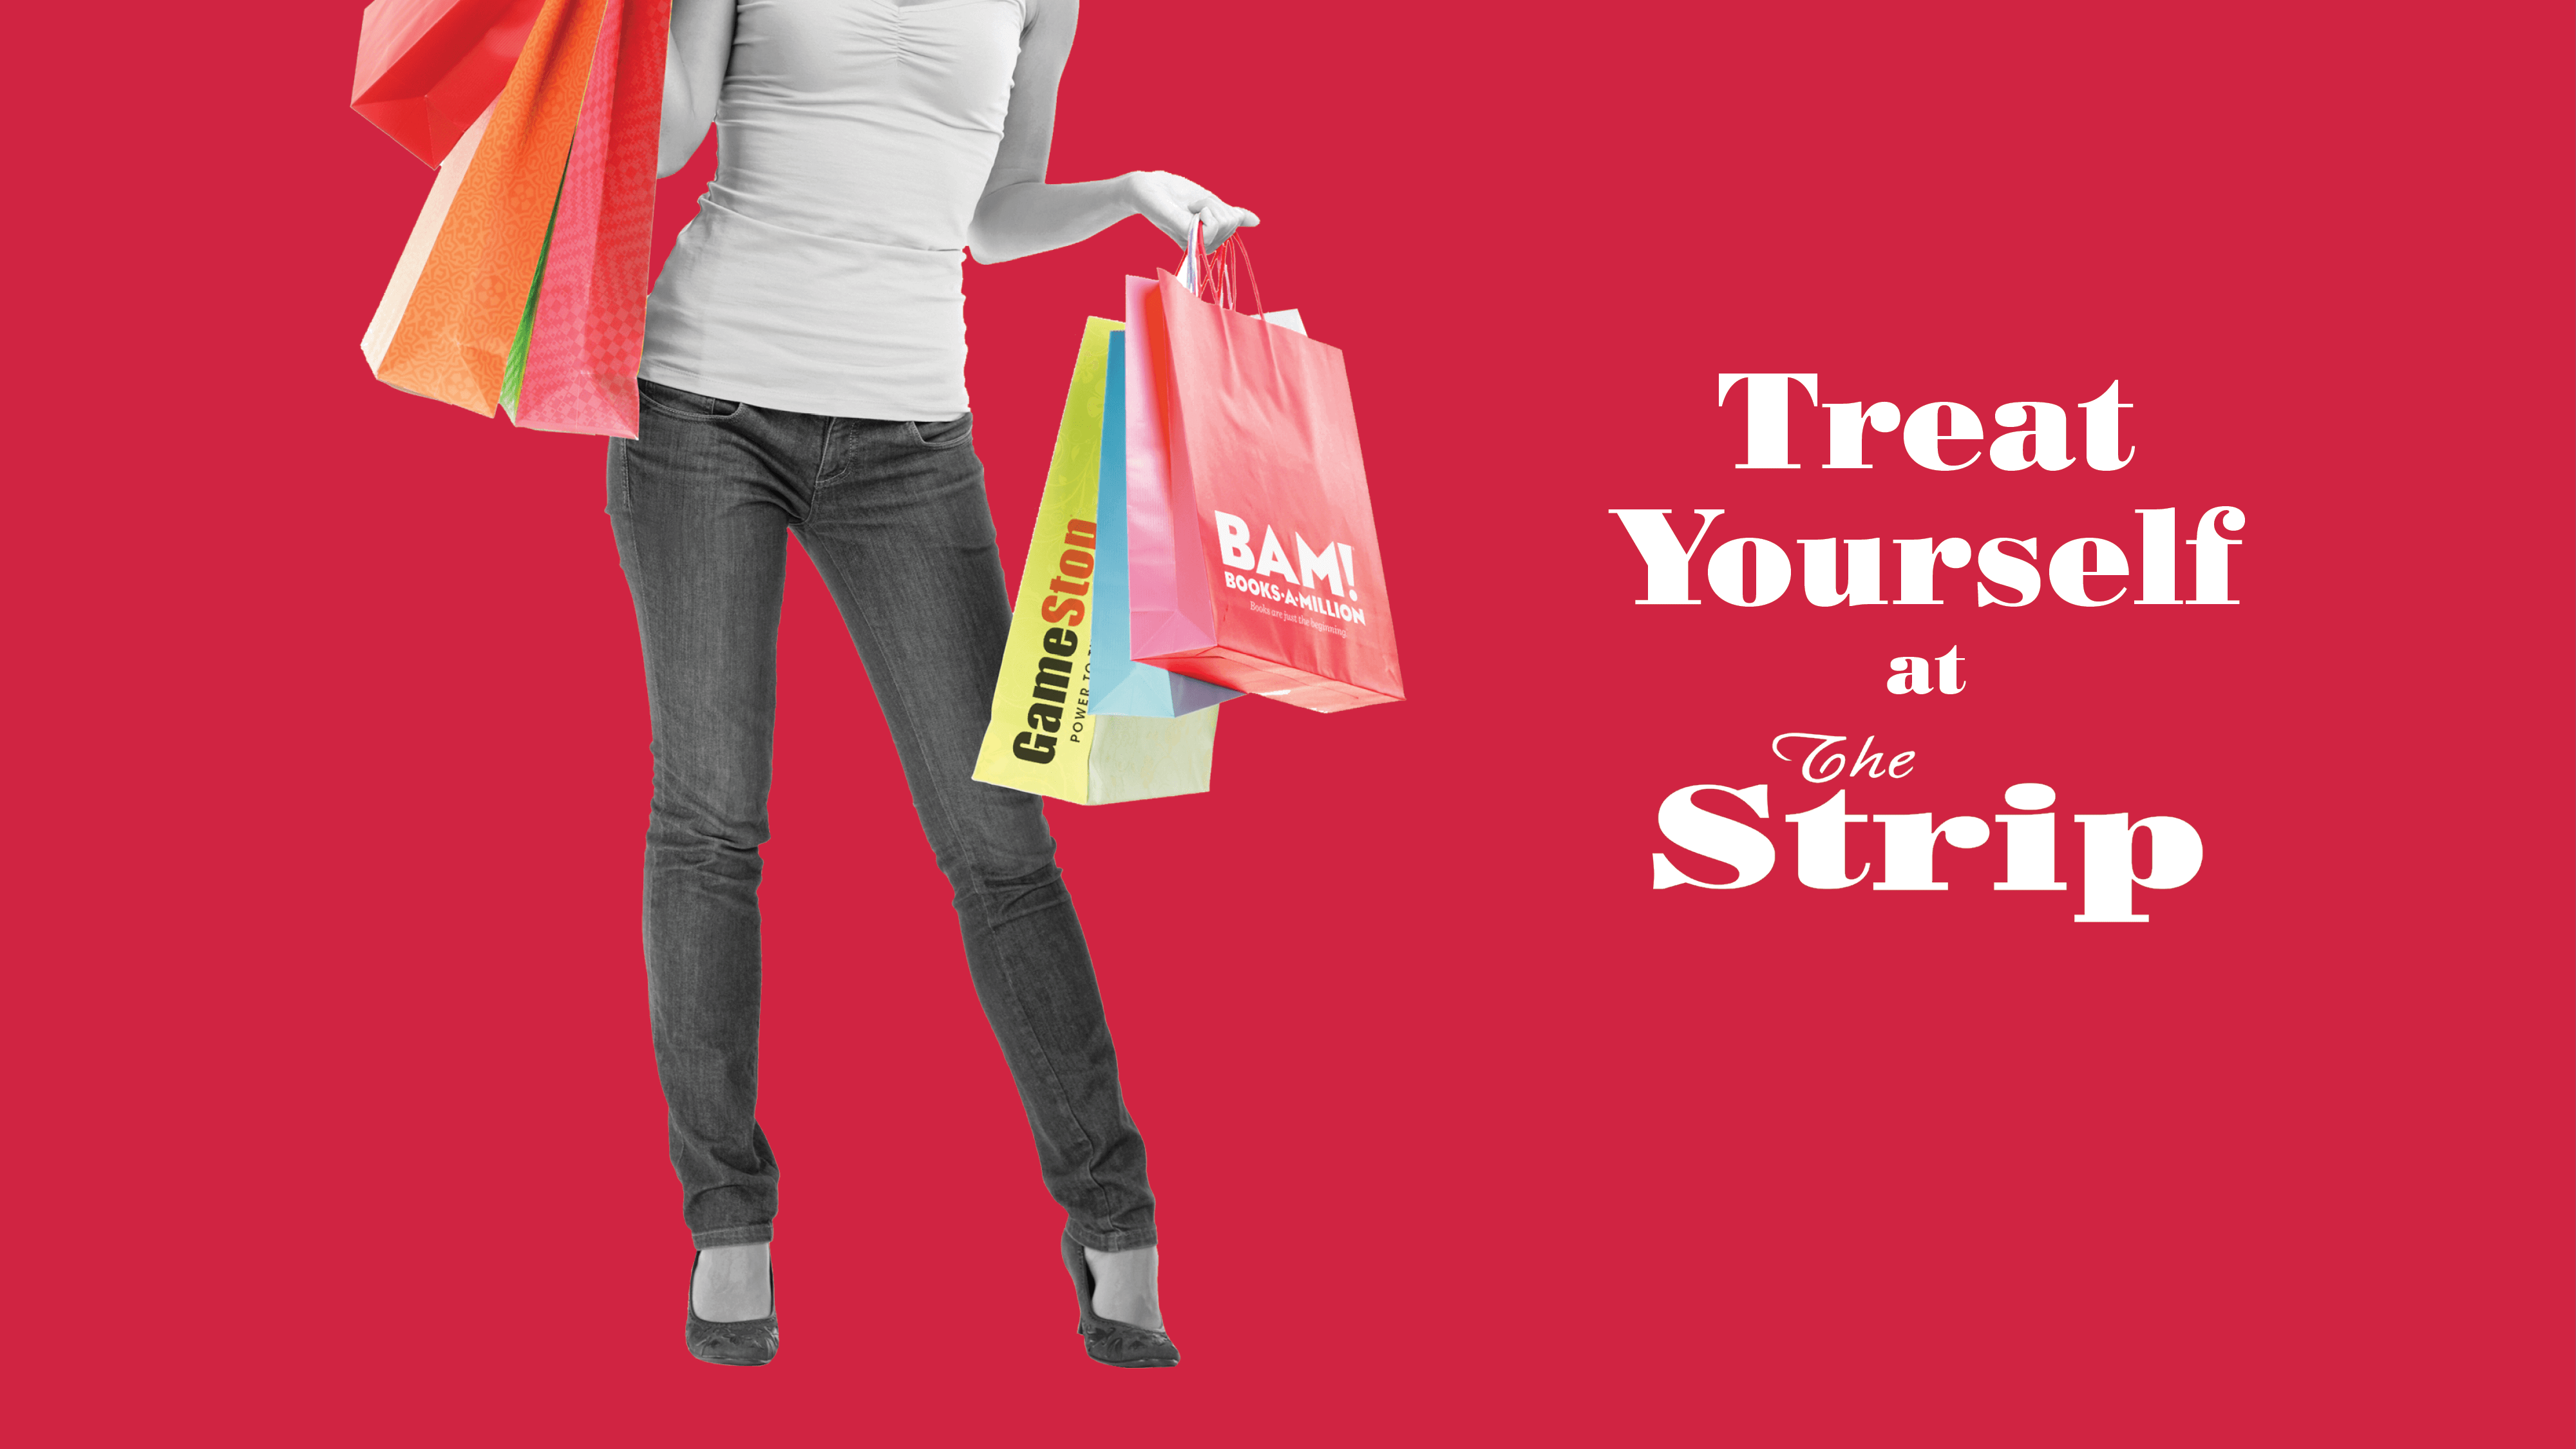 Treat Yourself at The Strip